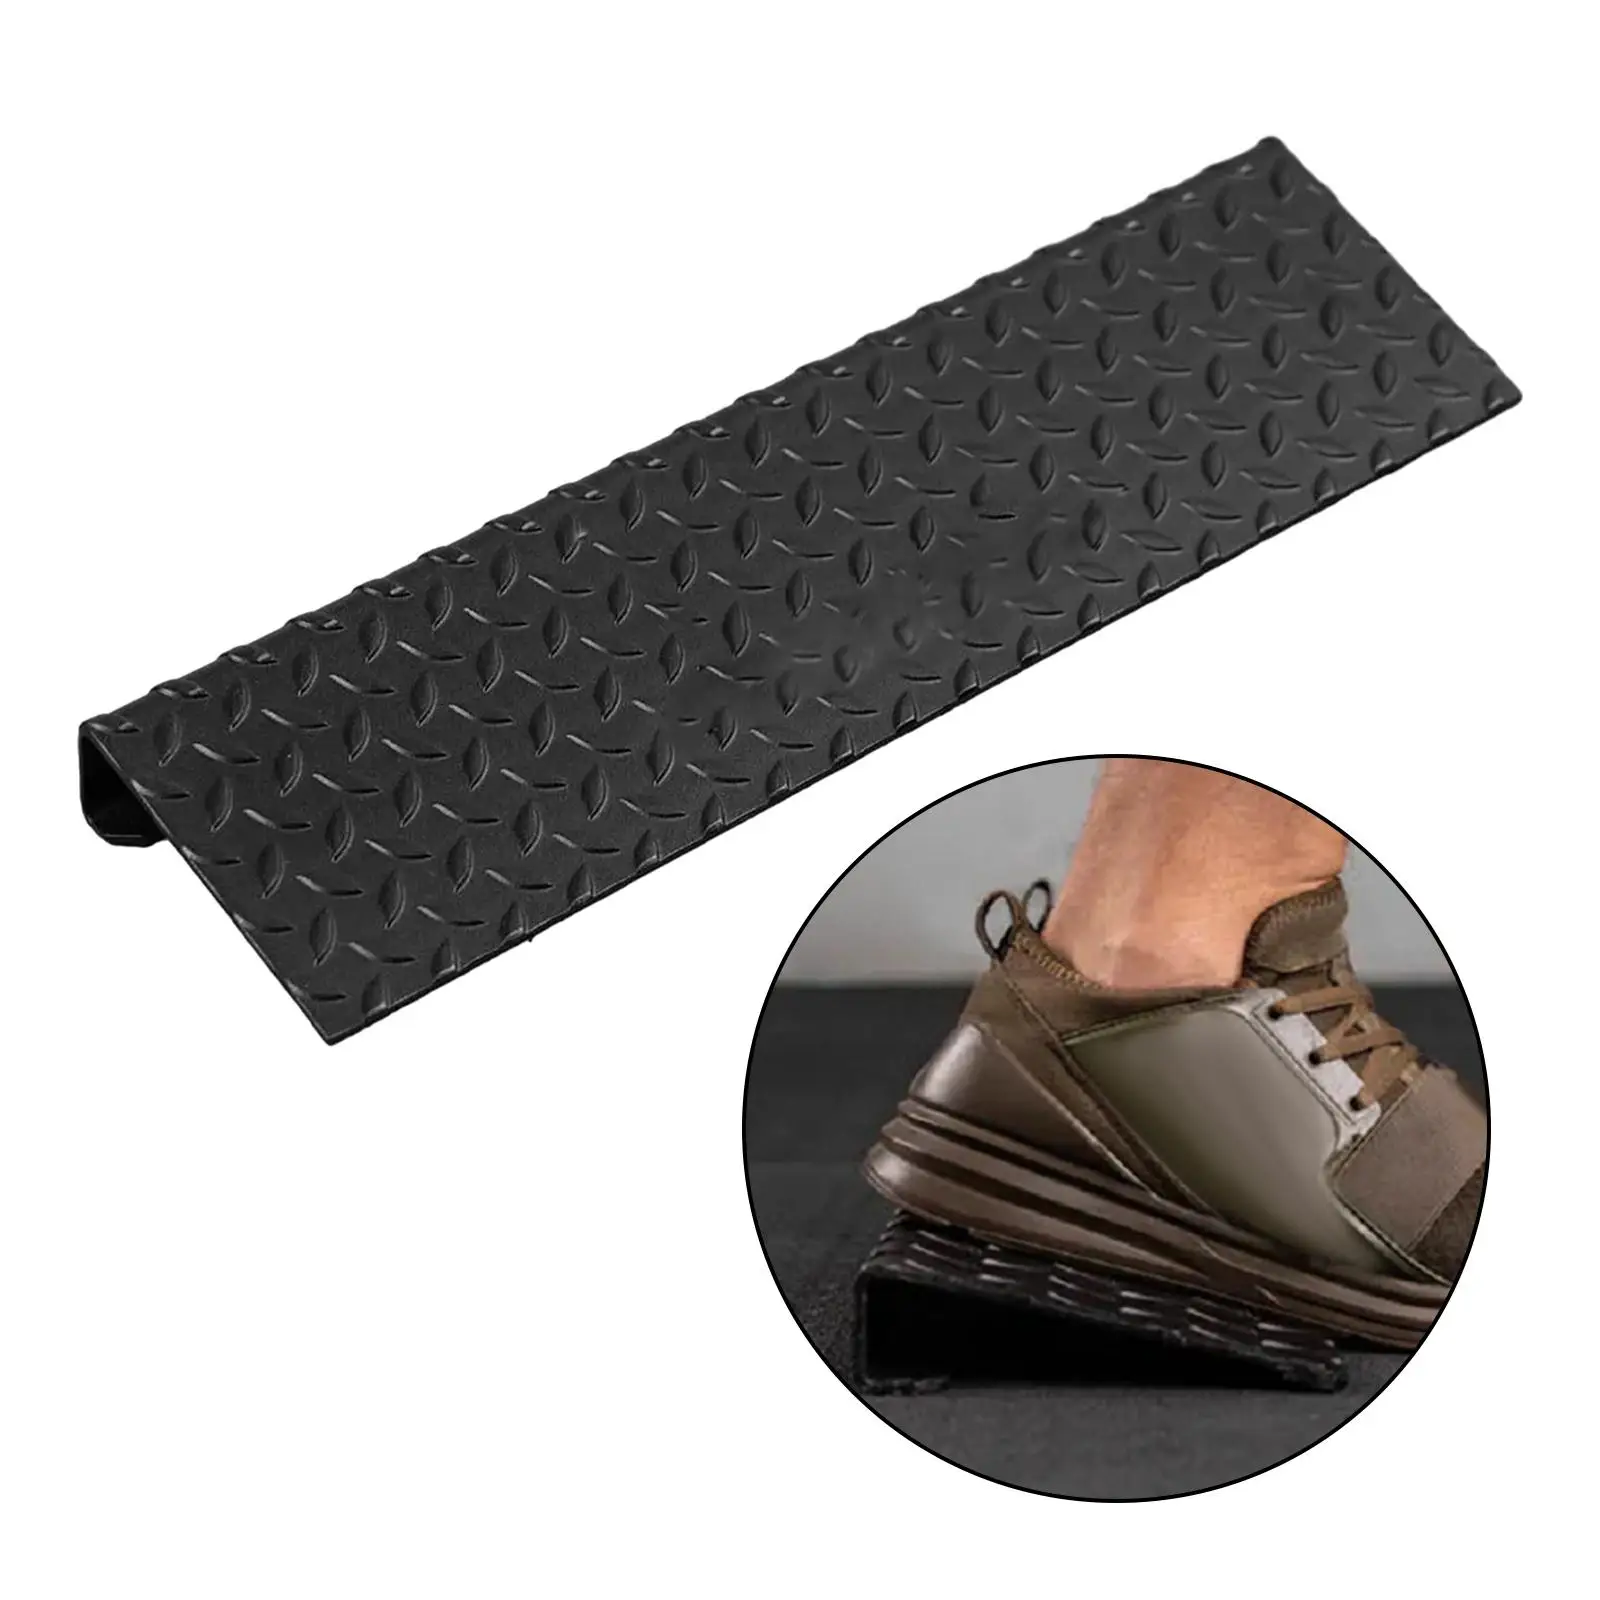 Slant Board Calf Stretcher for Stretching Tight Calves Home Gym Stretch Boards Leg Exercise Wedge Yoga Board Foot Incline Board